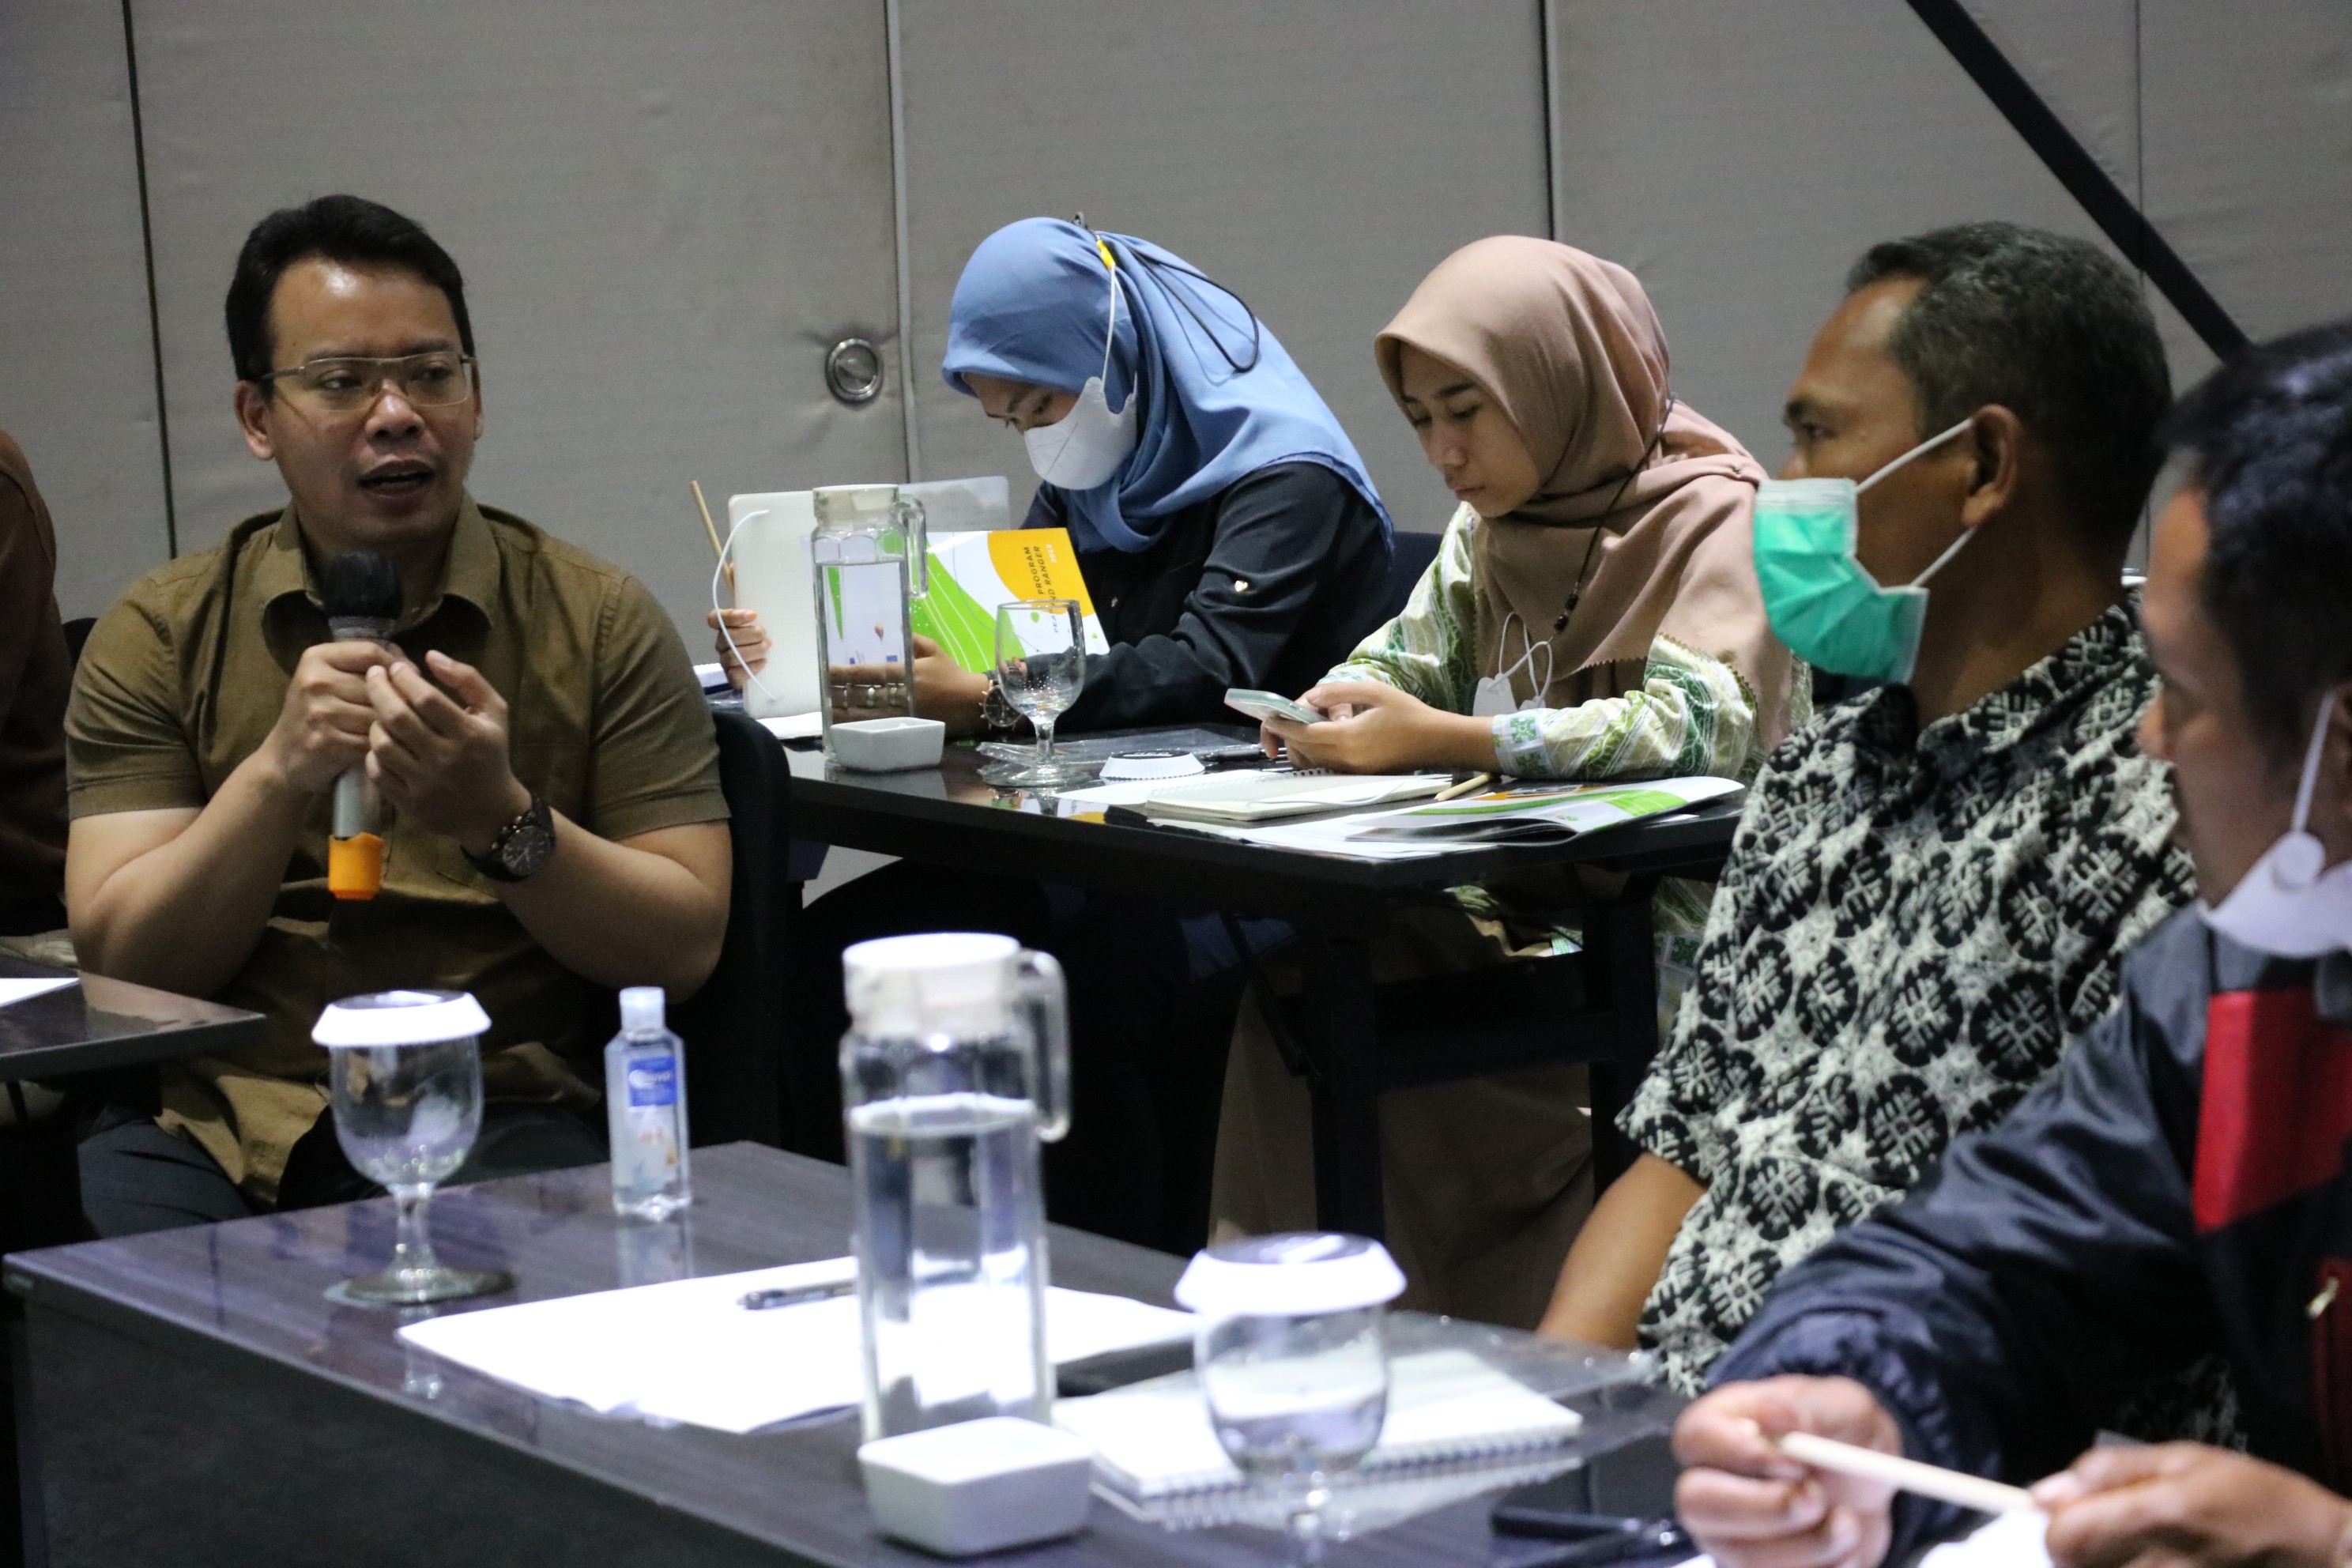 A discussion session following the presentation. Photo credit: M. Farhan Hersinanda for People for Peat